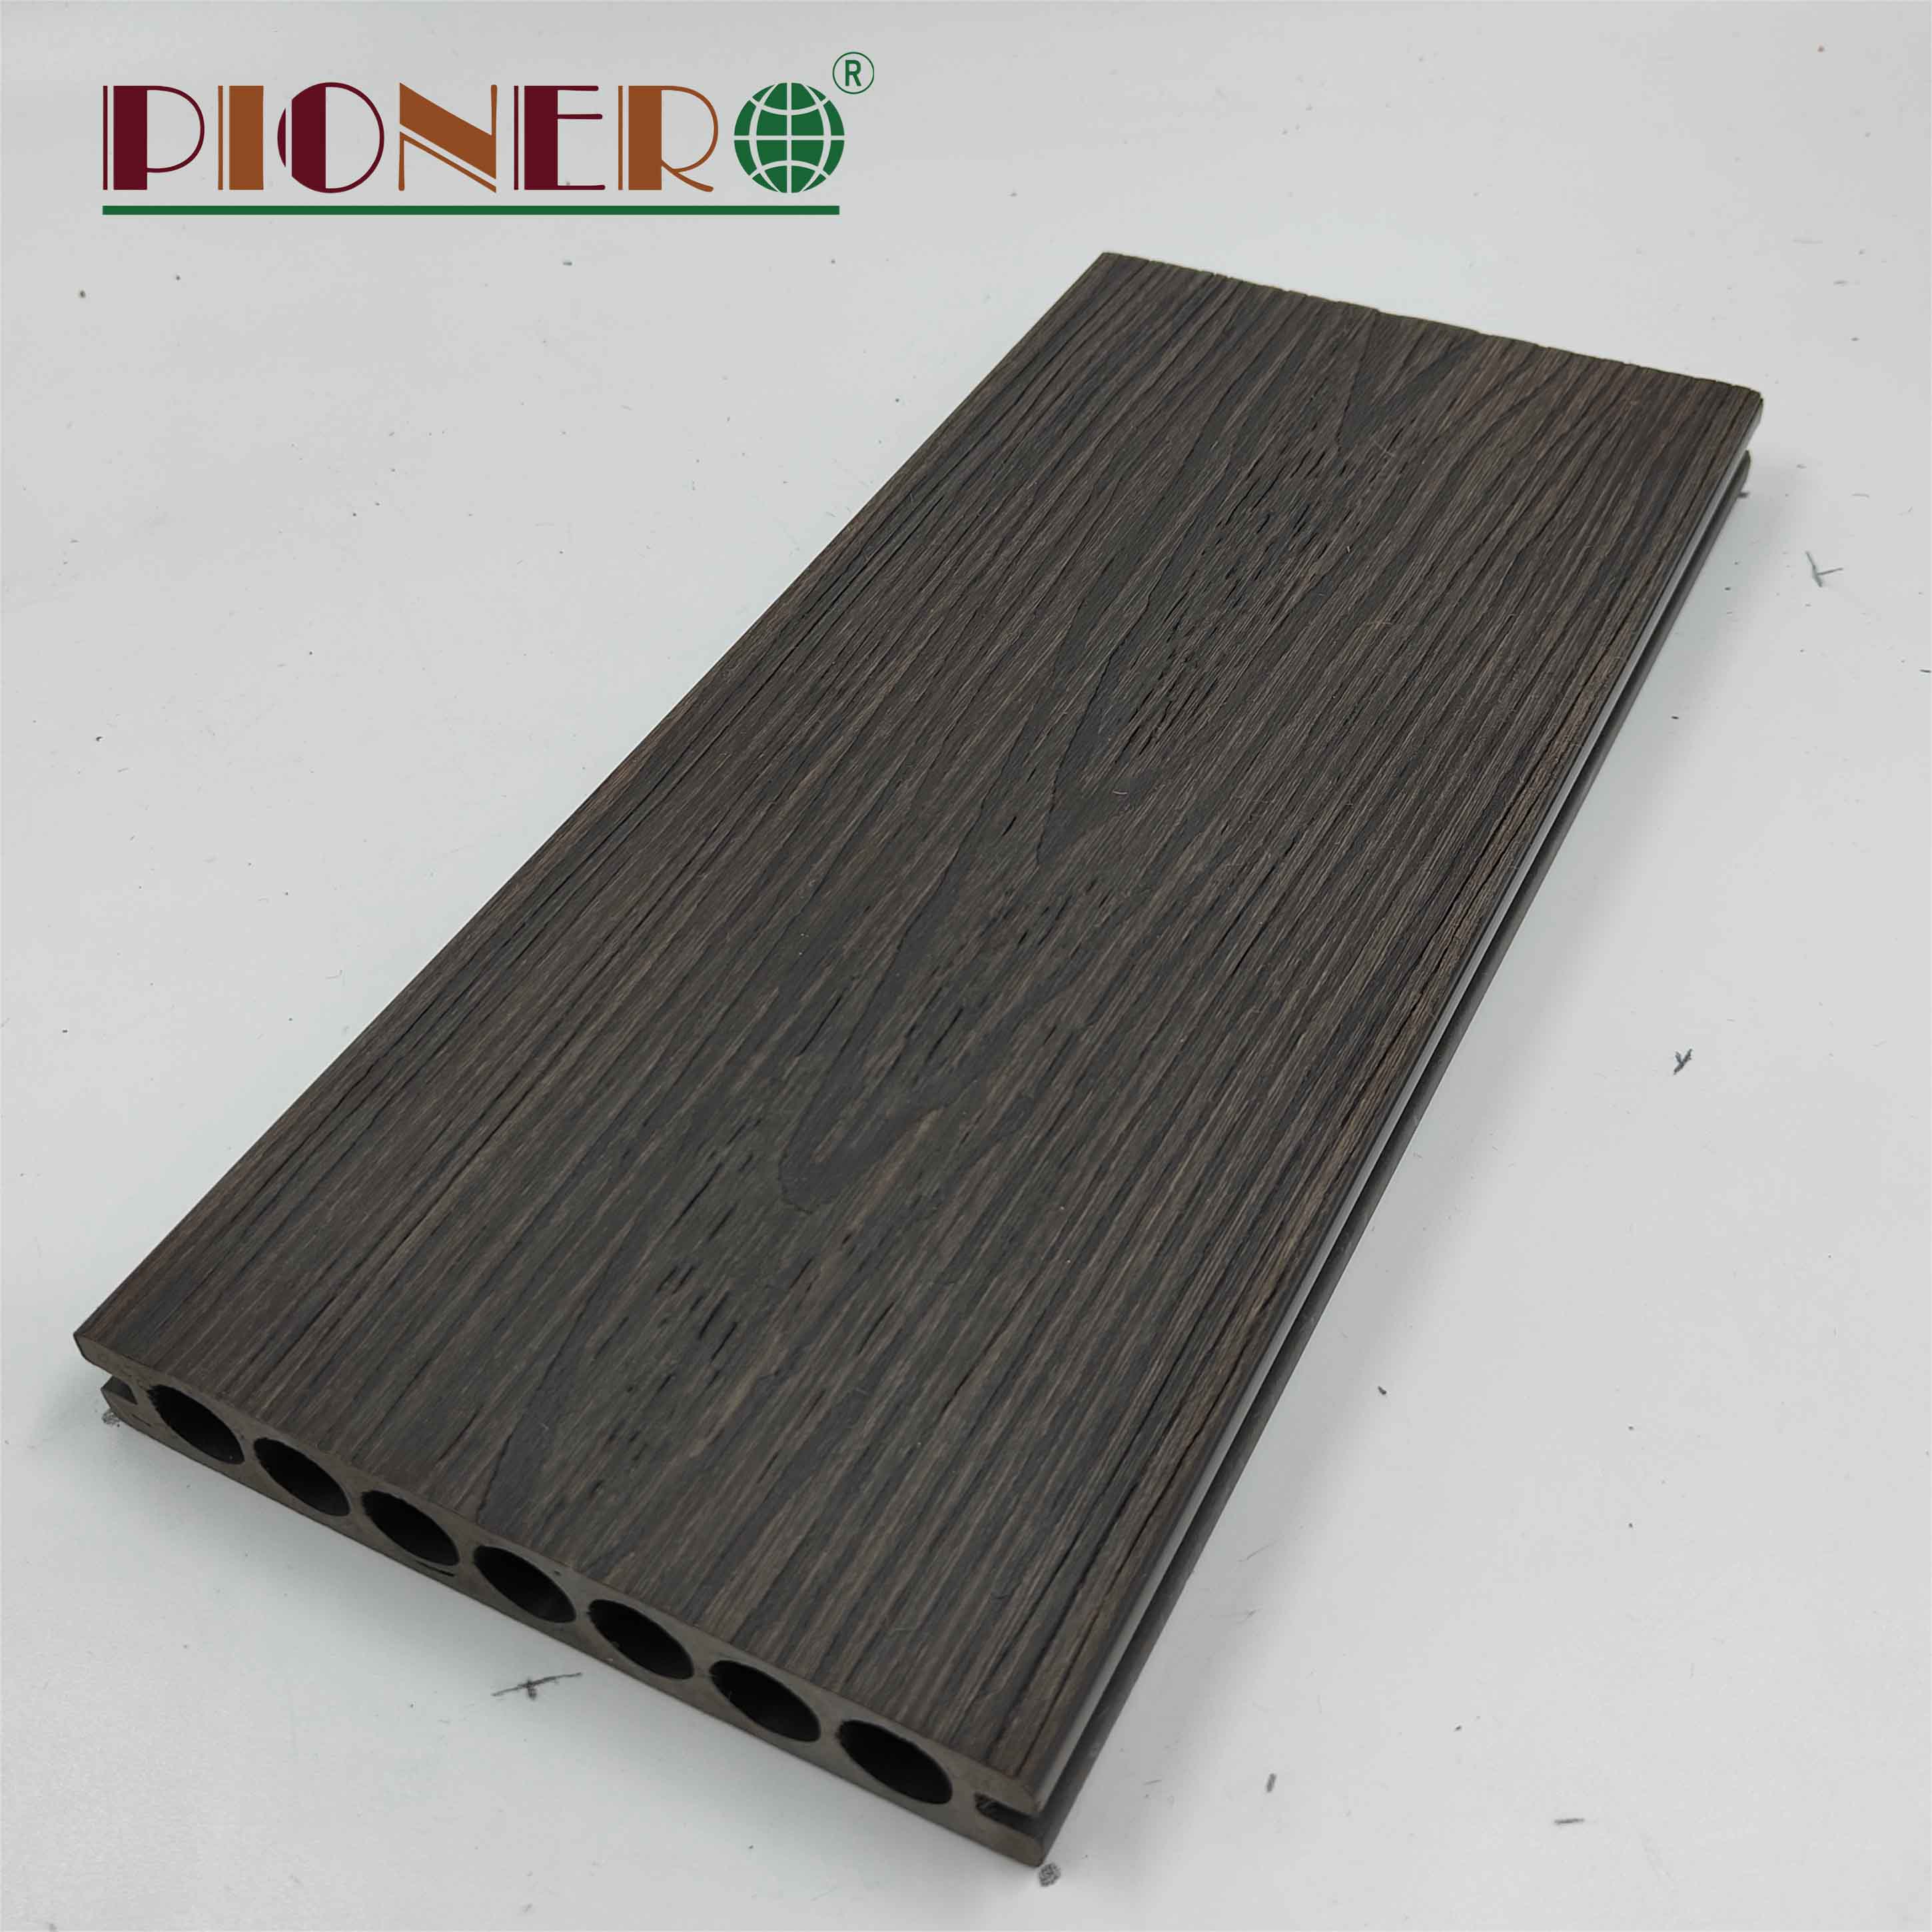 Colorfast and Anti-aging ASA Co-extruded WPC Decking